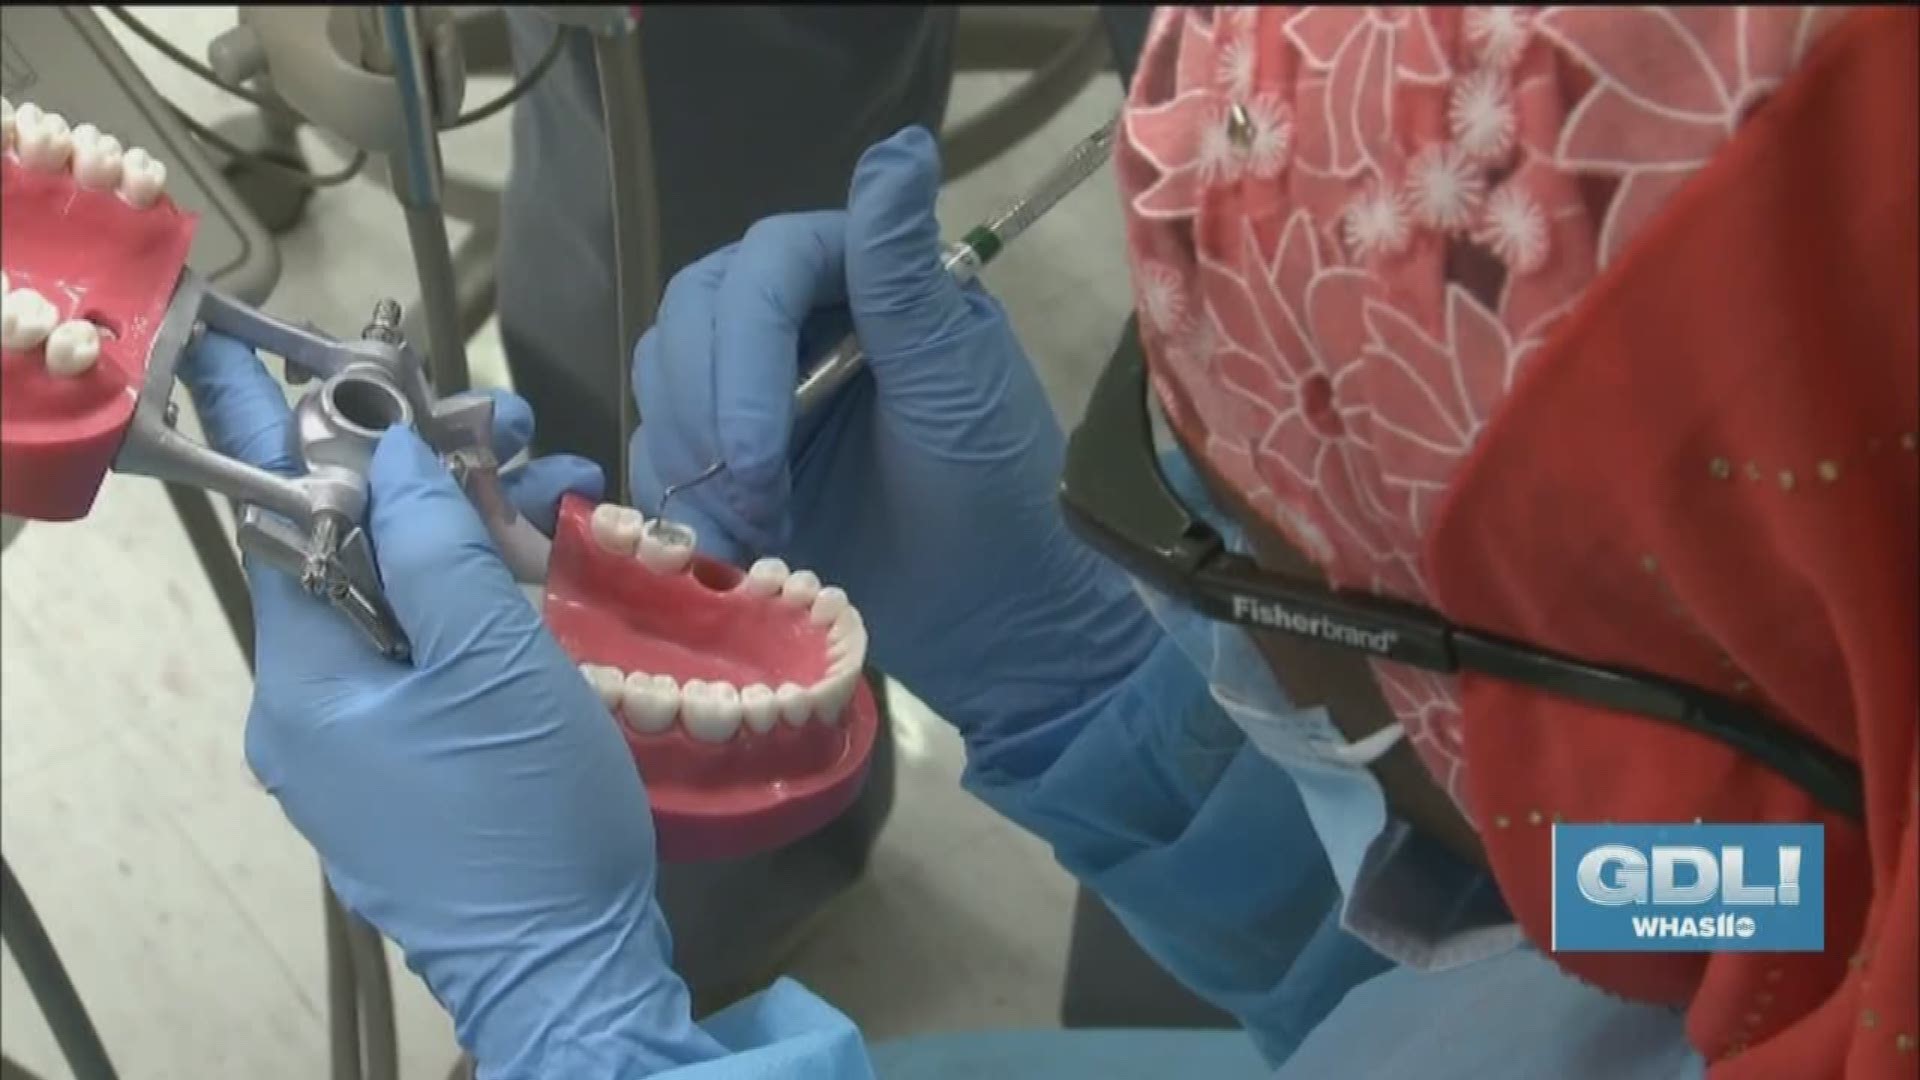 Central High School students are getting firsthand dental experience as part of the University of Louisville's signature partnership initiative in west Louisville.